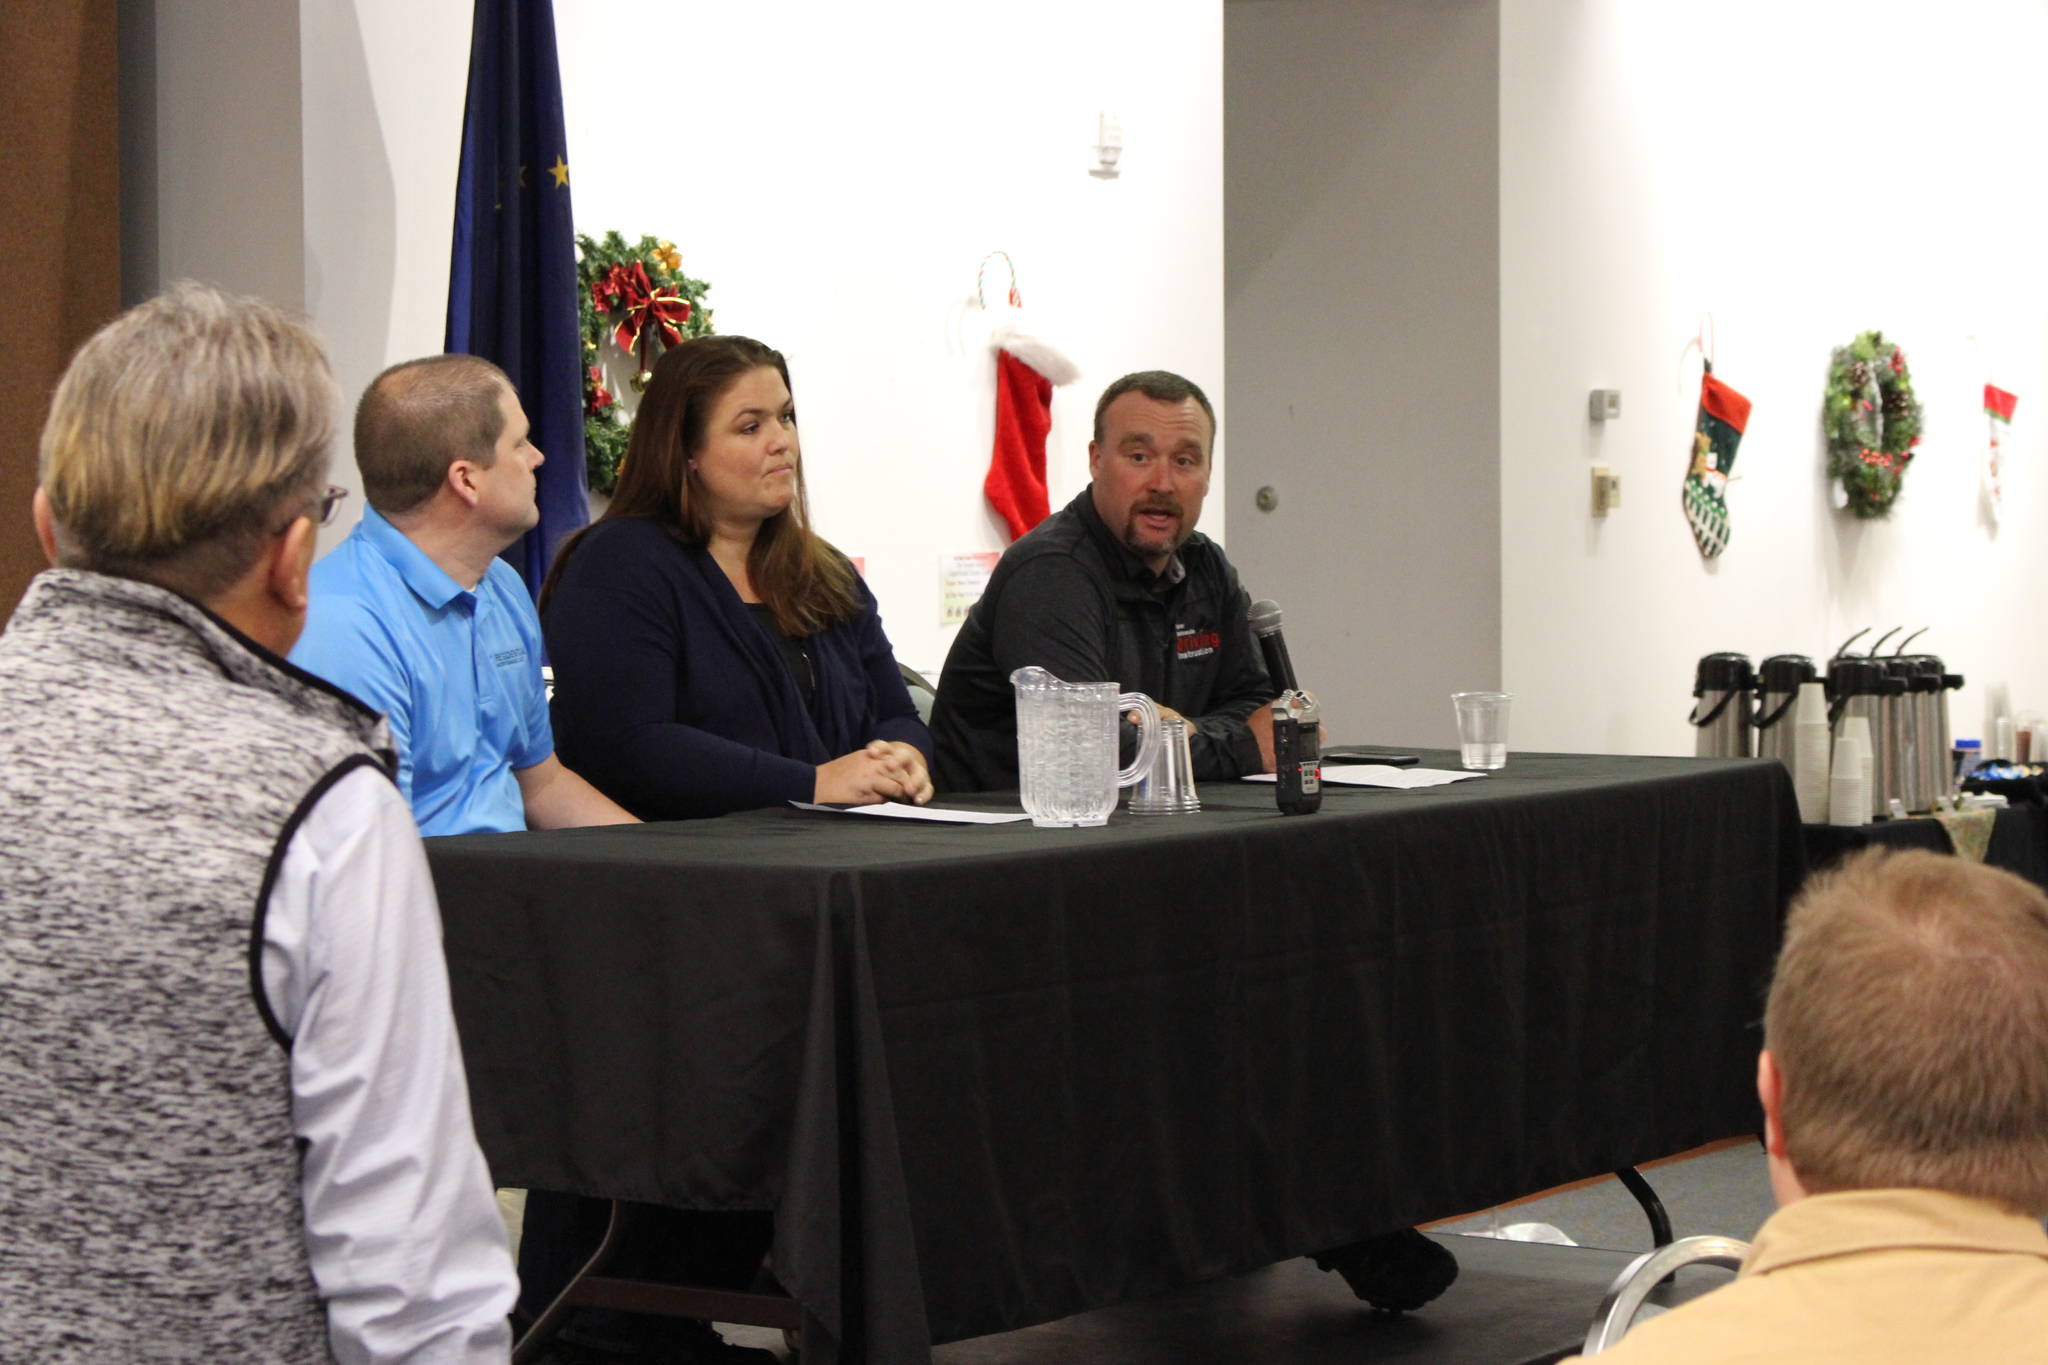 Local business owners Aaron Swanson, Darcy Swanson and Alex Douthit discuss their experiences as entrepreneurs in the community during the Kenai and Soldotna Chambers of Commerce Luncheon at the Kenai Visitor and Cultural Center on Nov. 20, 2019. (Photo by Brian Mazurek/Peninsula Clarion)